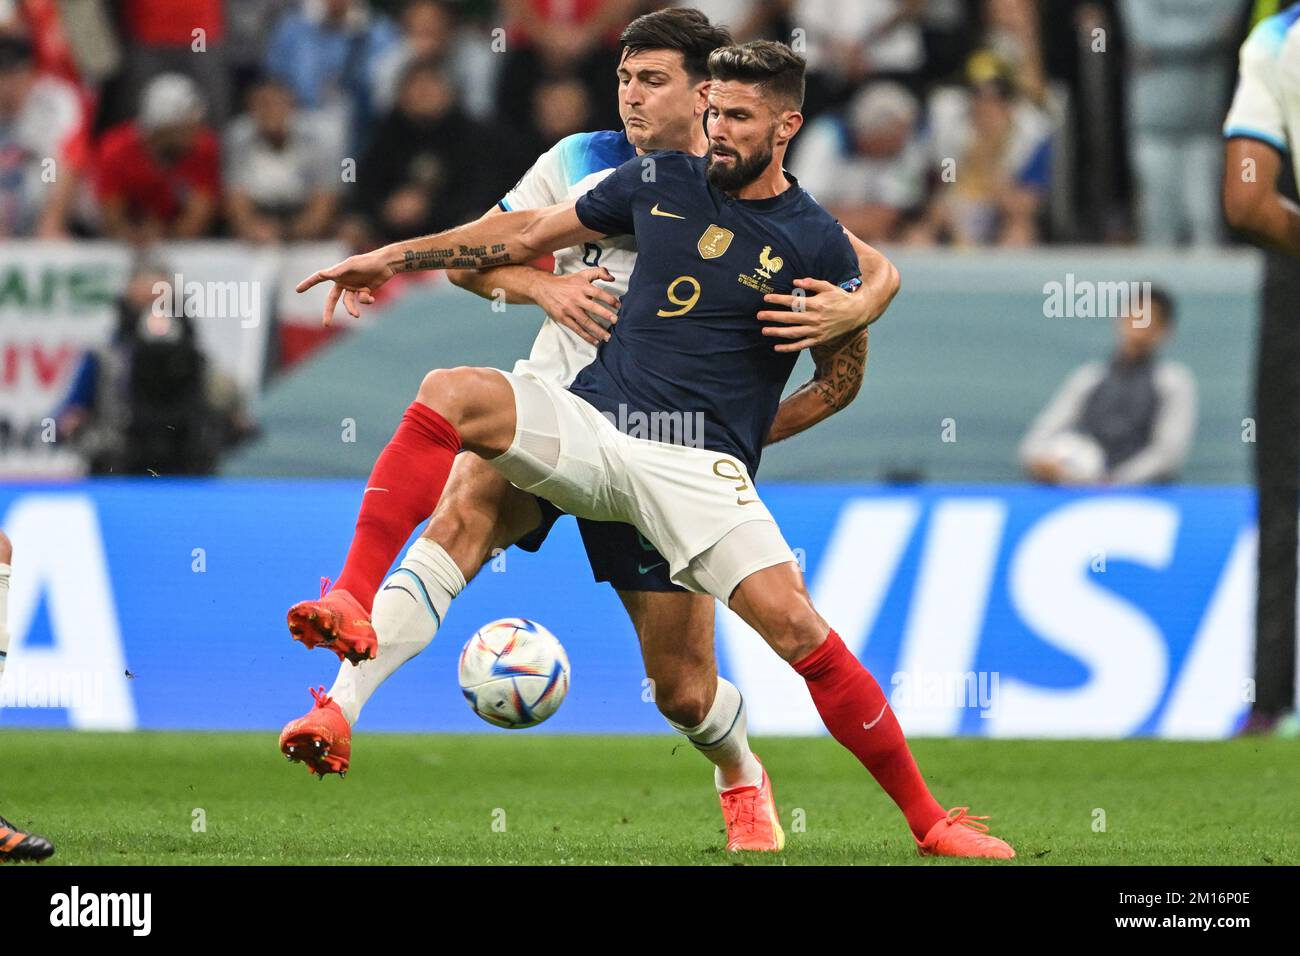 Al Chaur, Qatar. 10th Dec, 2022. Soccer, World Cup, England - France, final round, quarter-final, Al-Bait Stadium, England's Harry Maguire and France's Olivier Giroud in duel. Credit: Robert Michael/dpa/Alamy Live News Stock Photo